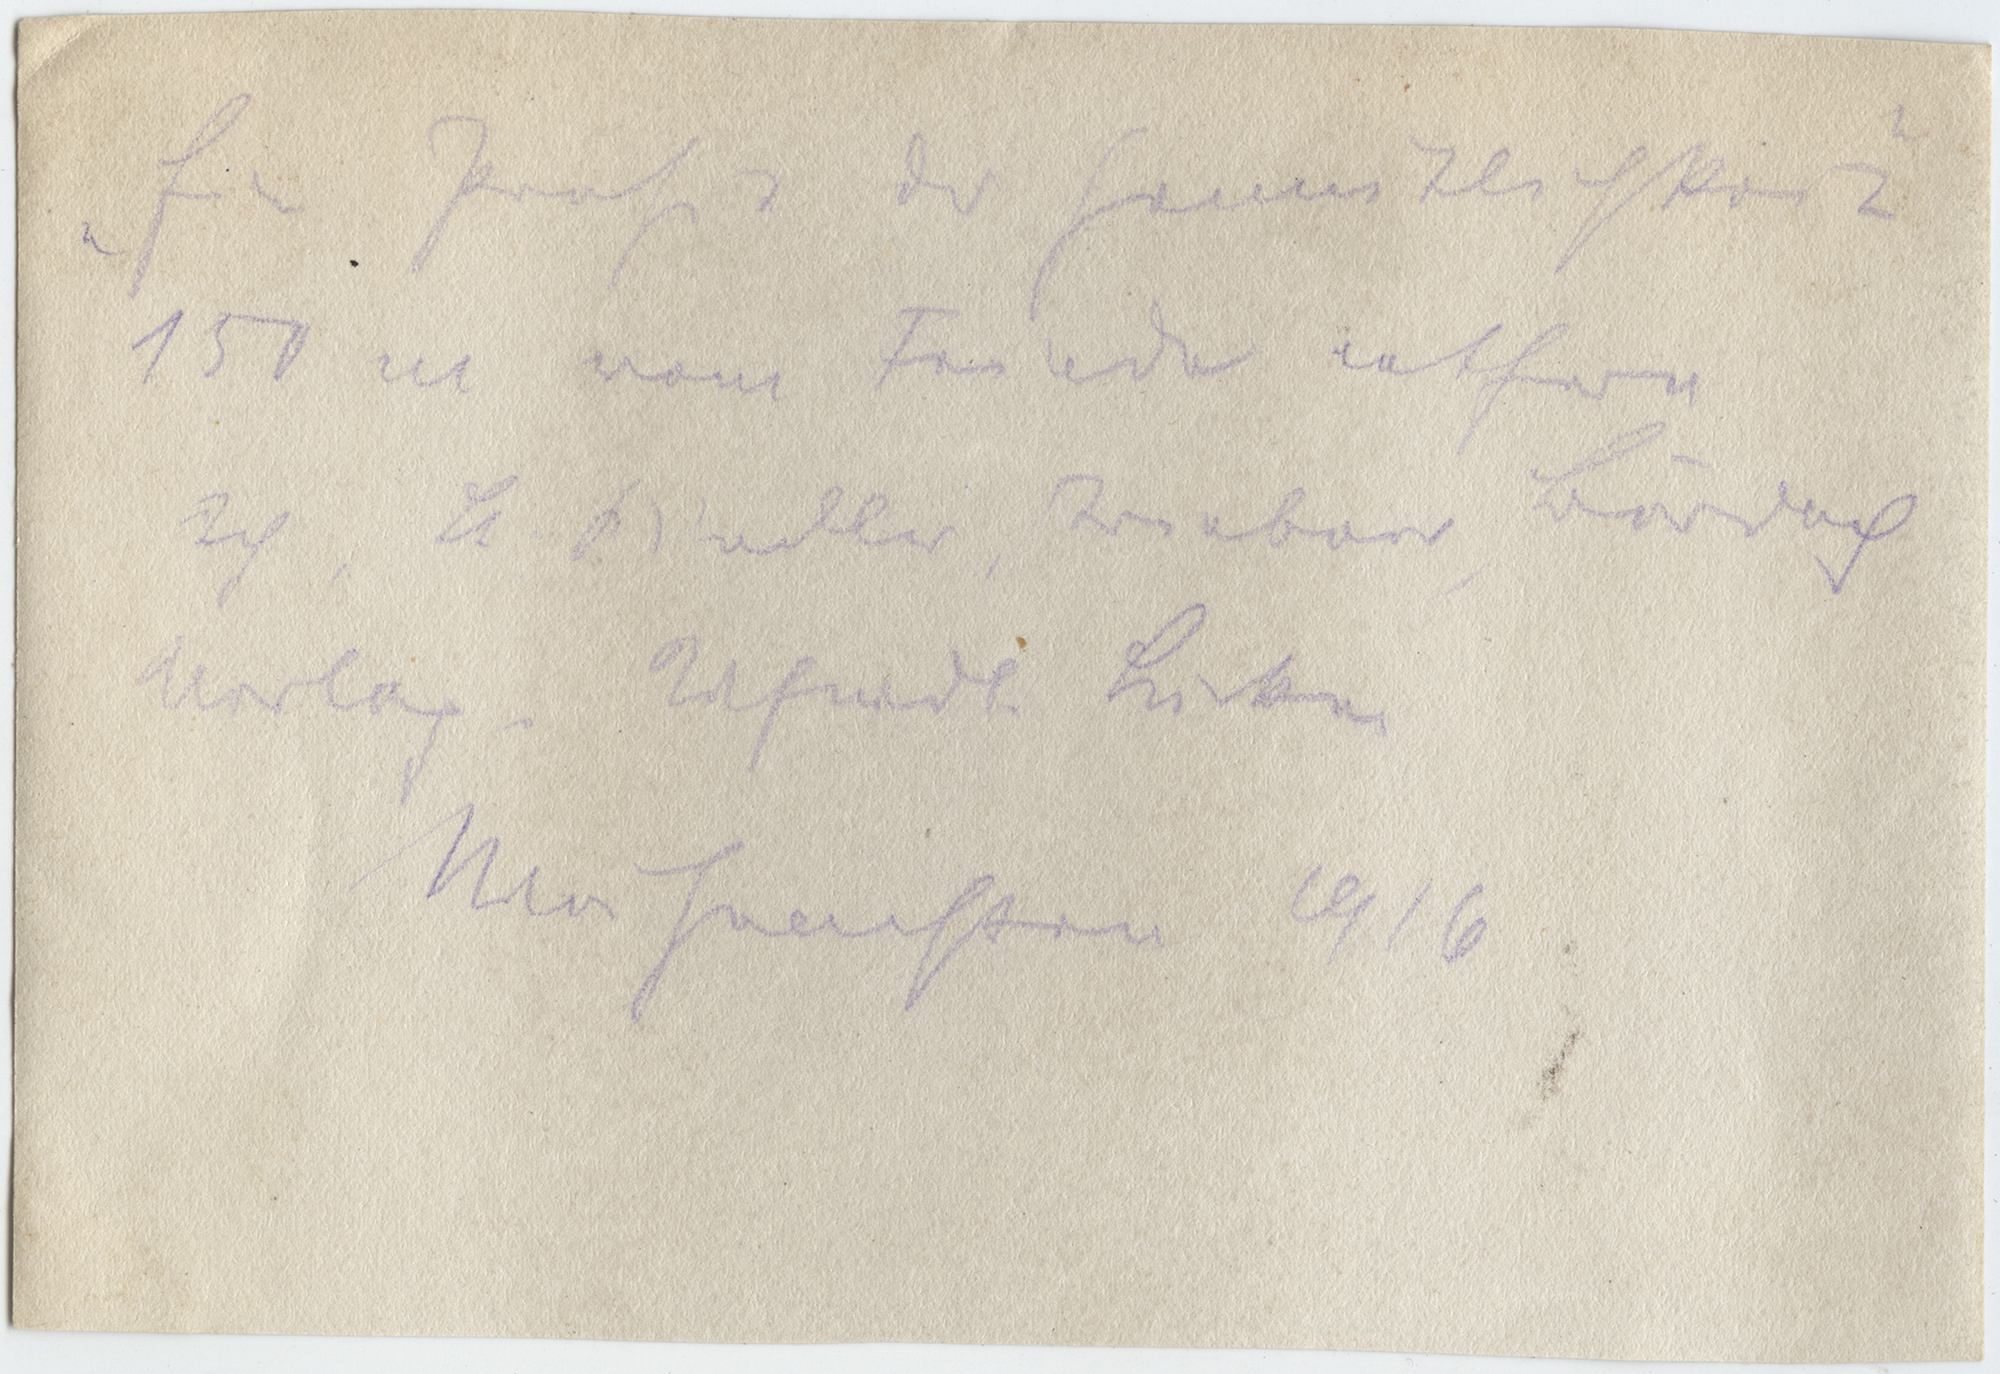 Back of an old photograph with faded blue writing in cursive German